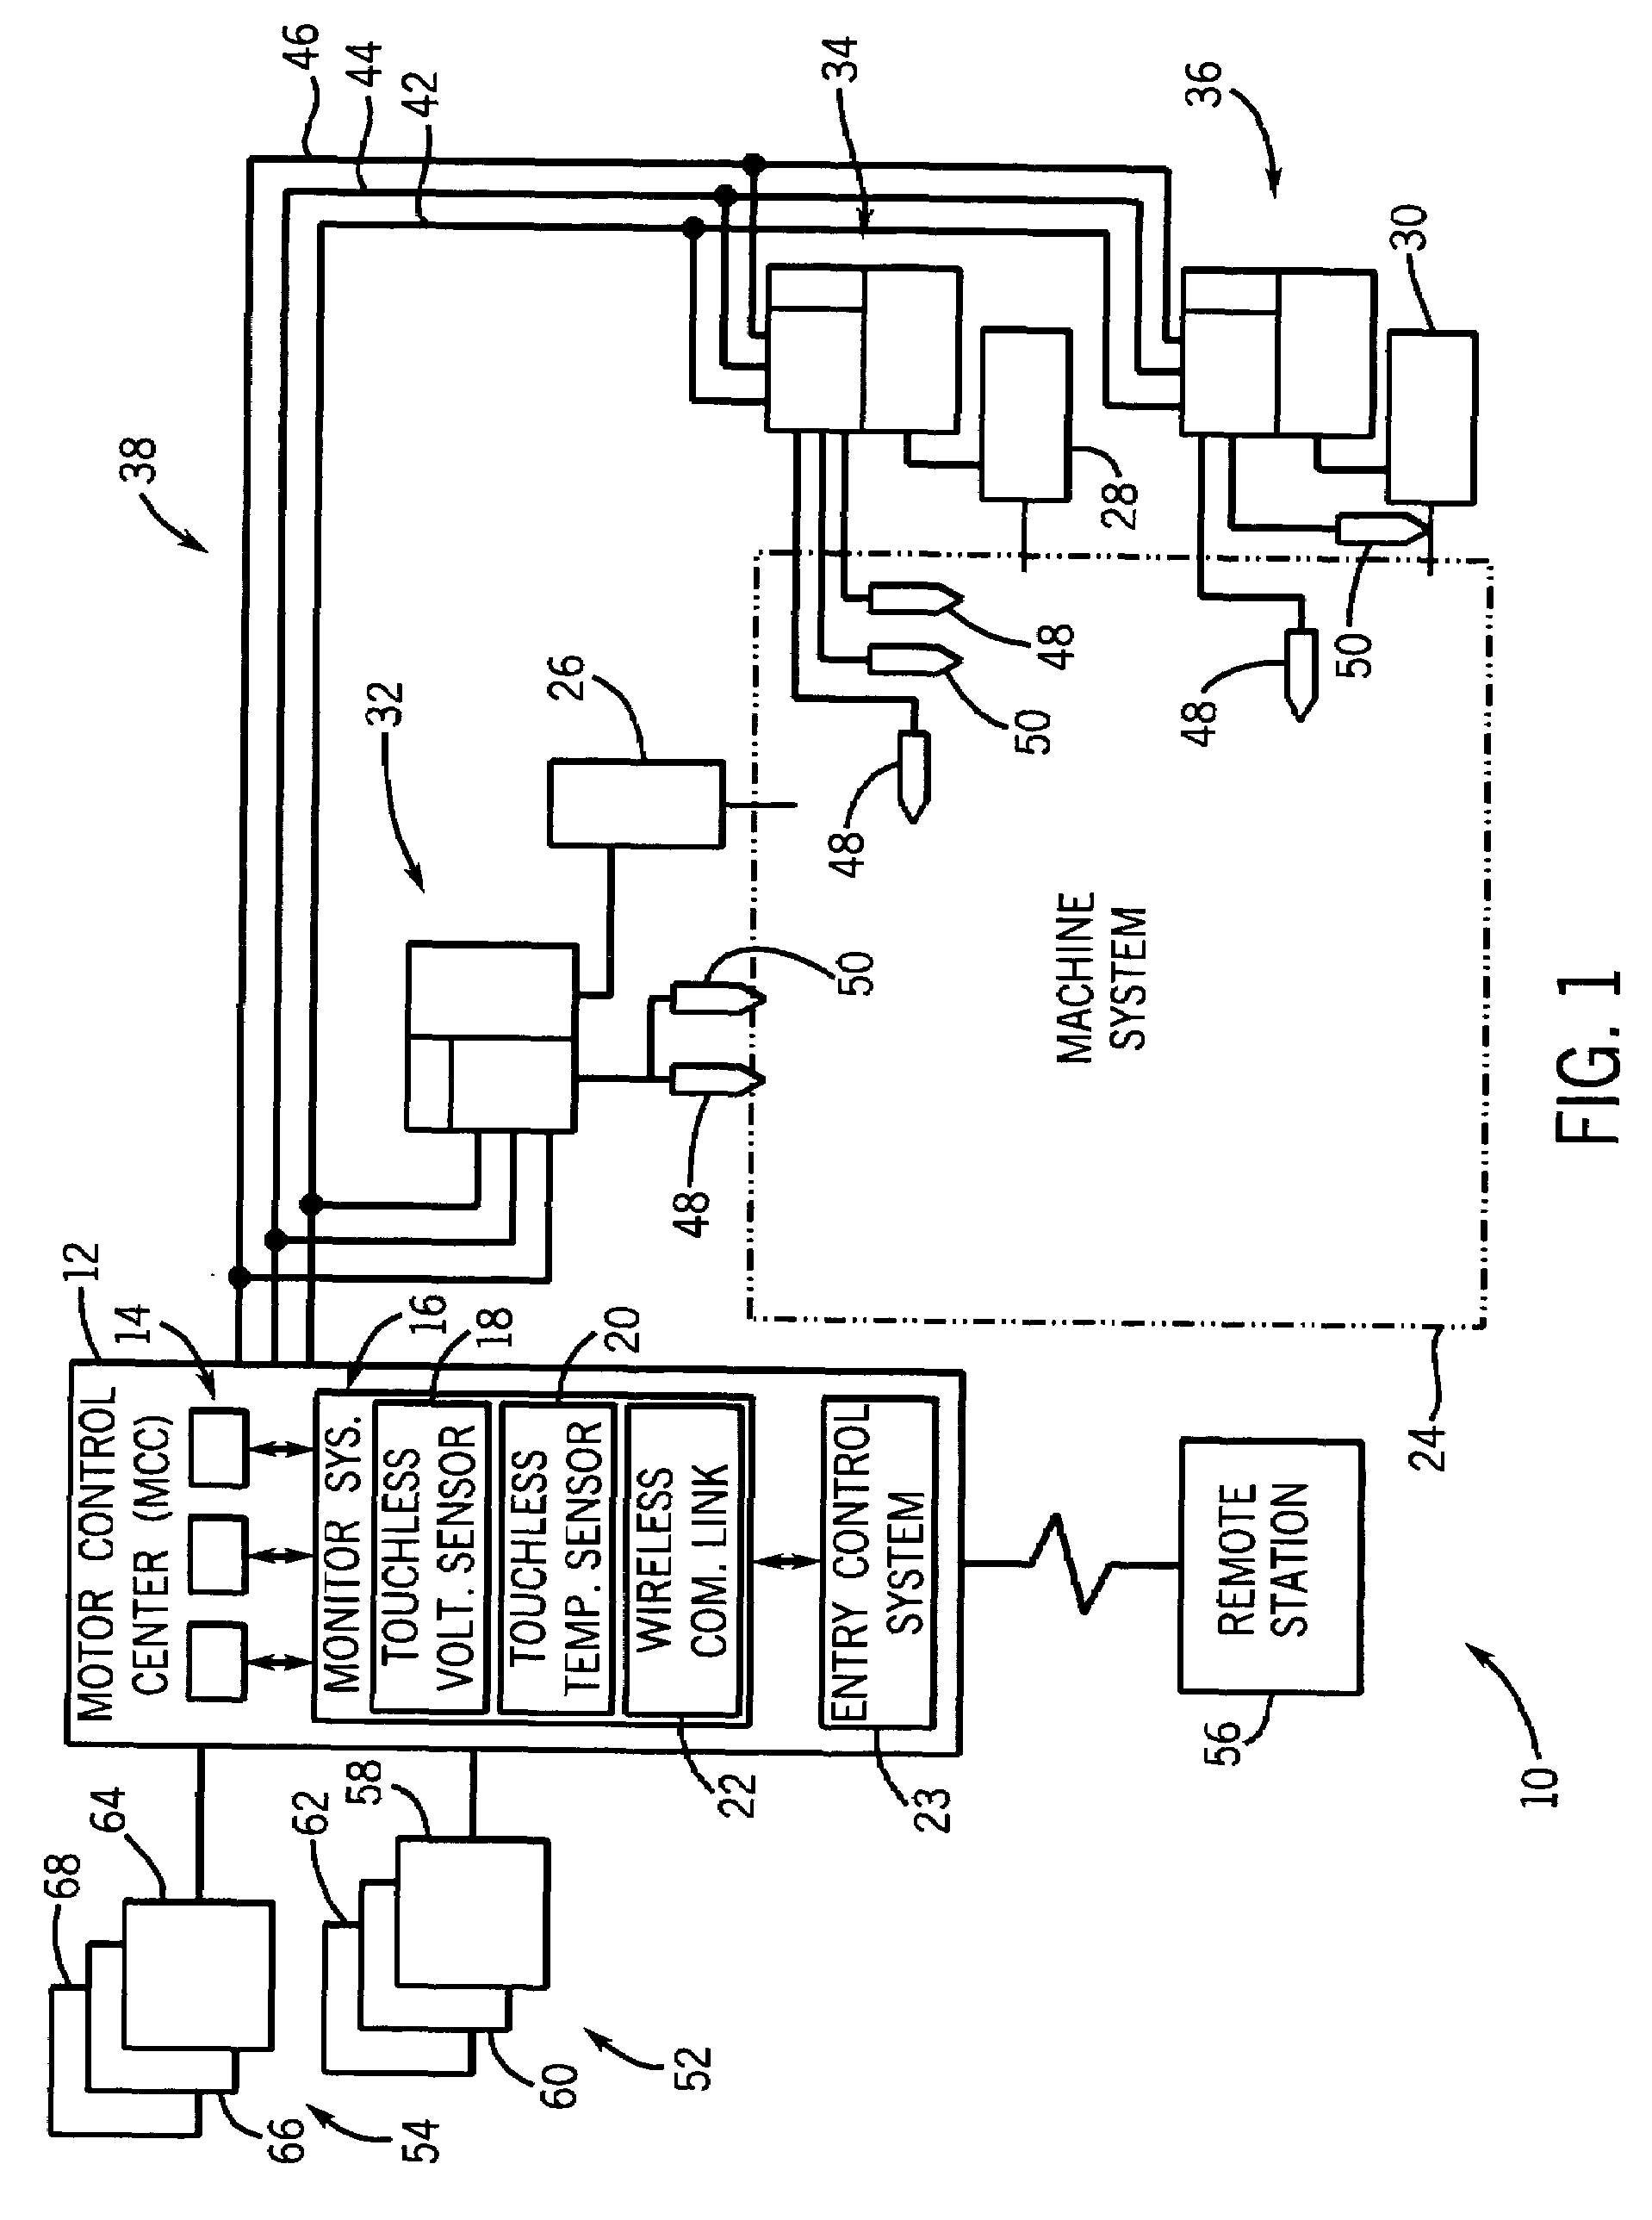 System and method for monitoring a motor control center